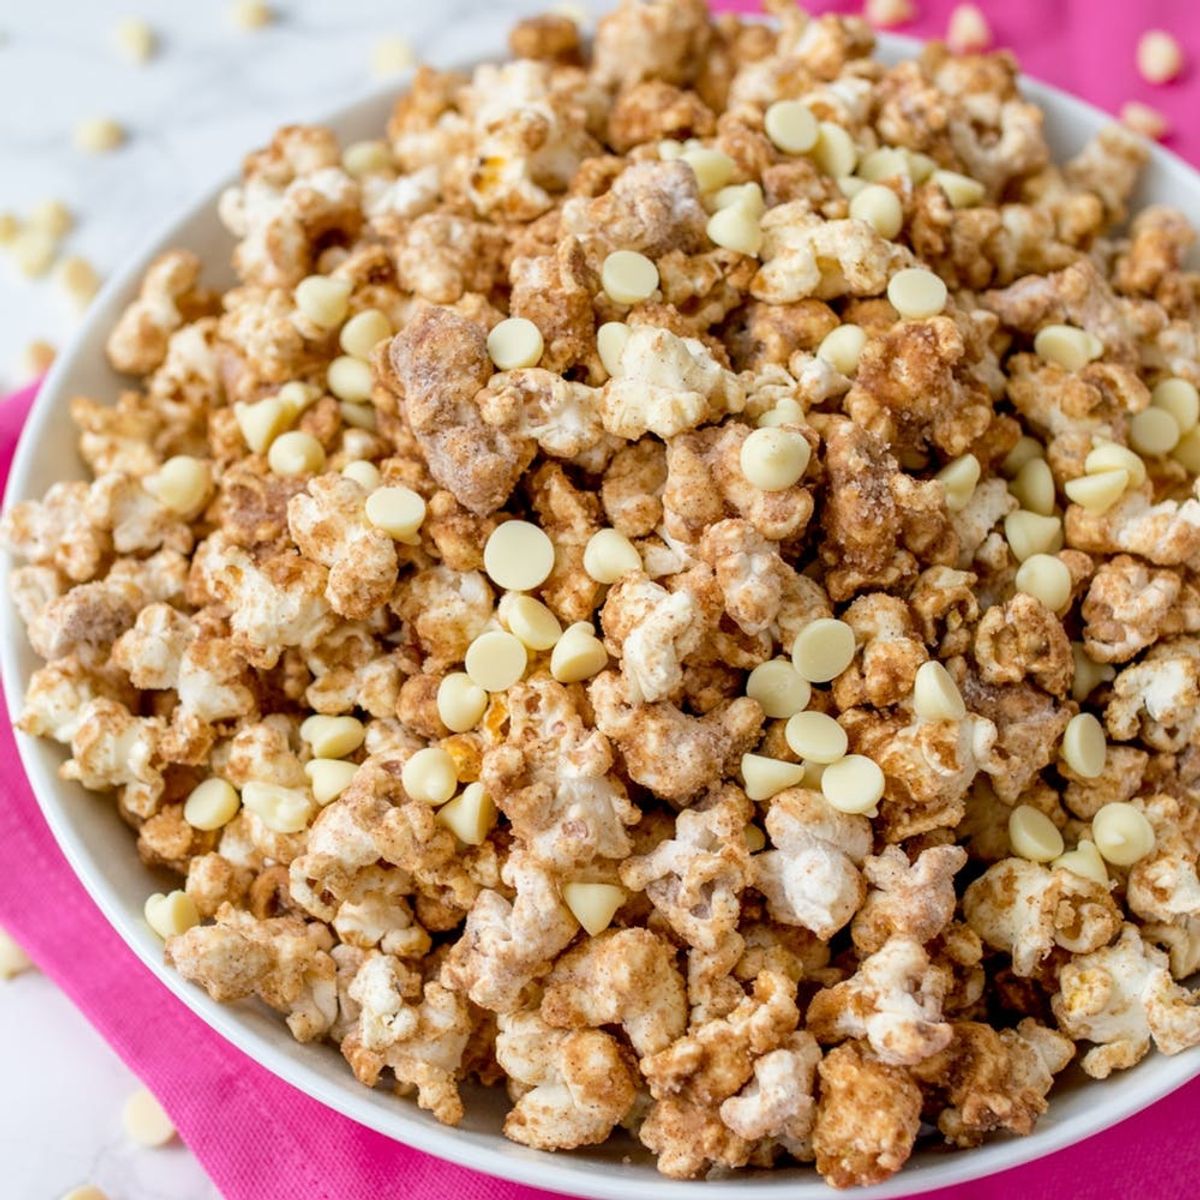 How to Make Churro Popcorn in Less Than 10 Minutes